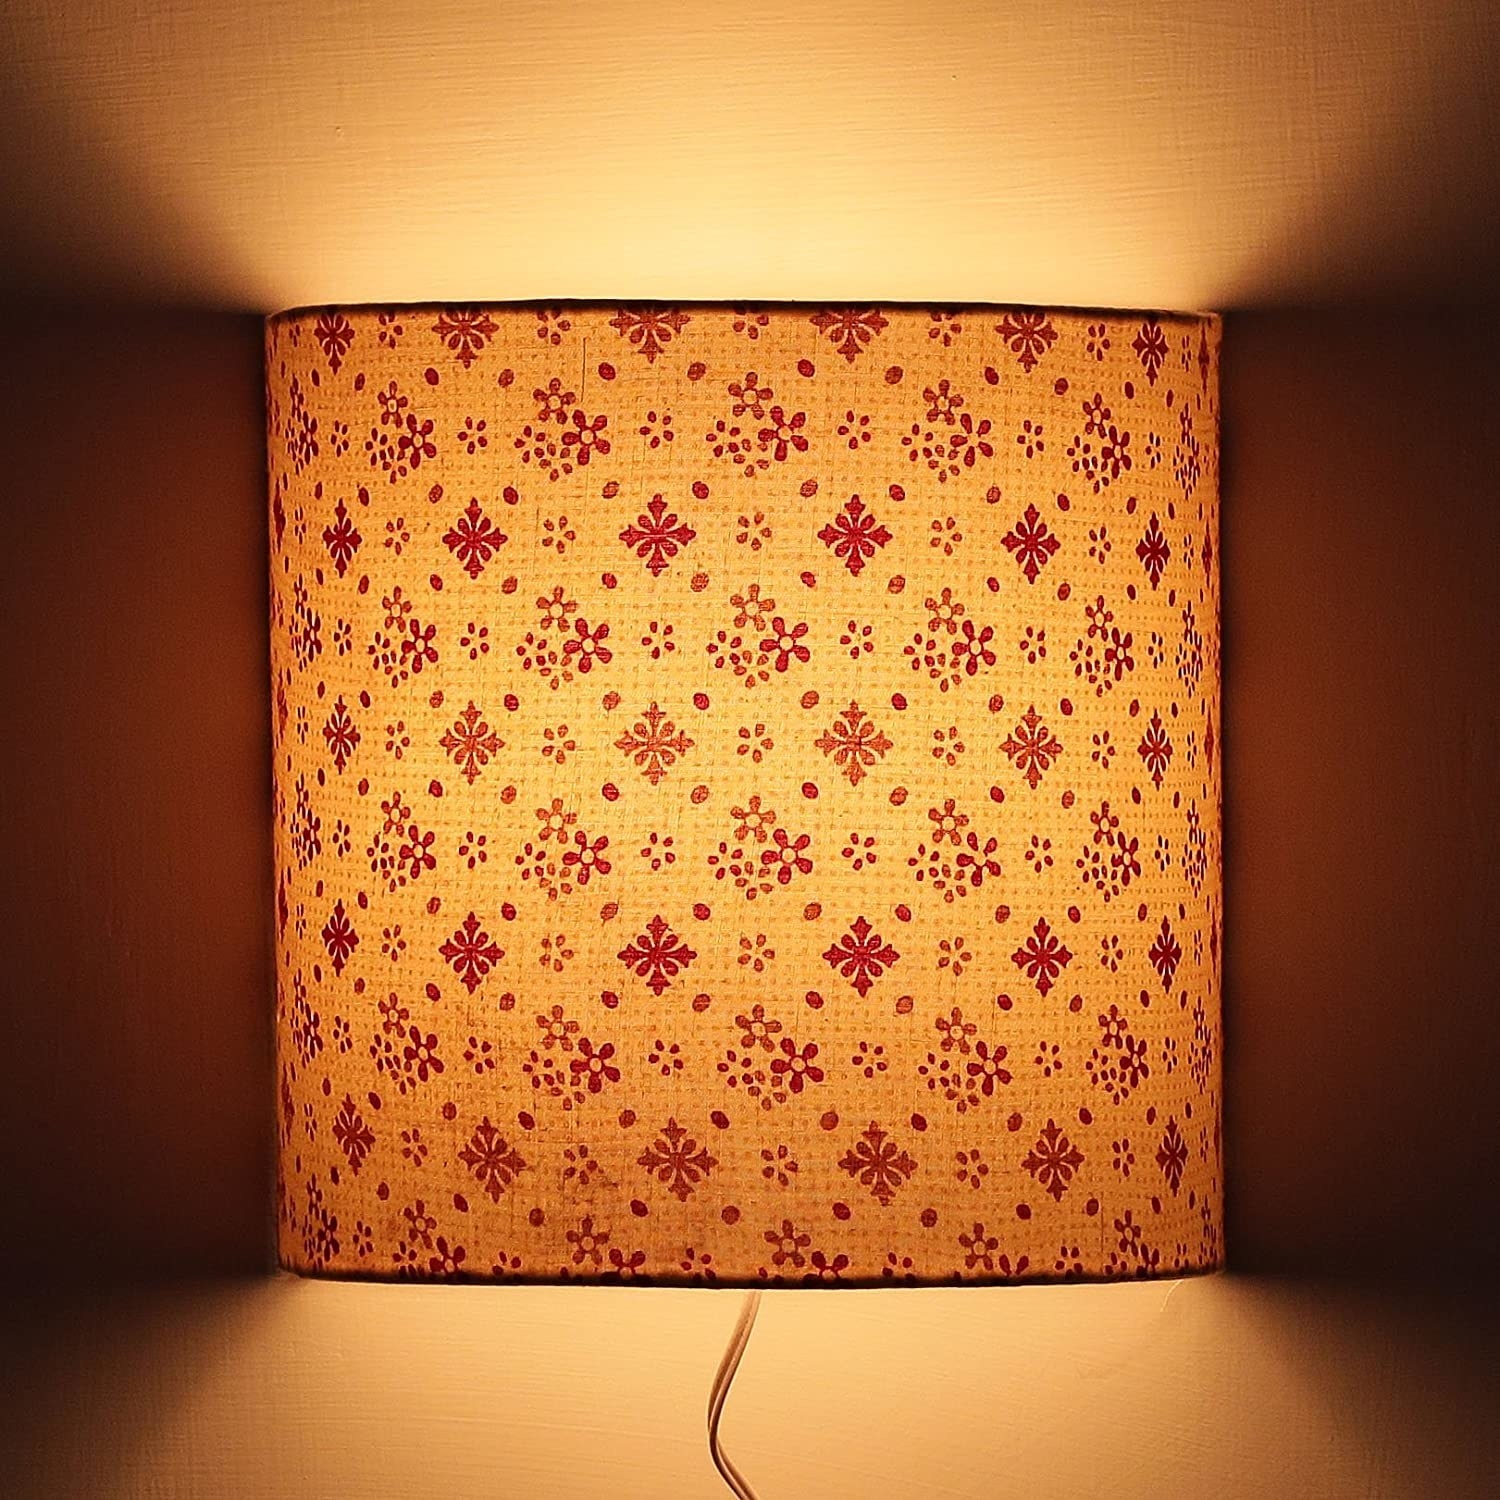 A beige wall-mounted lamp